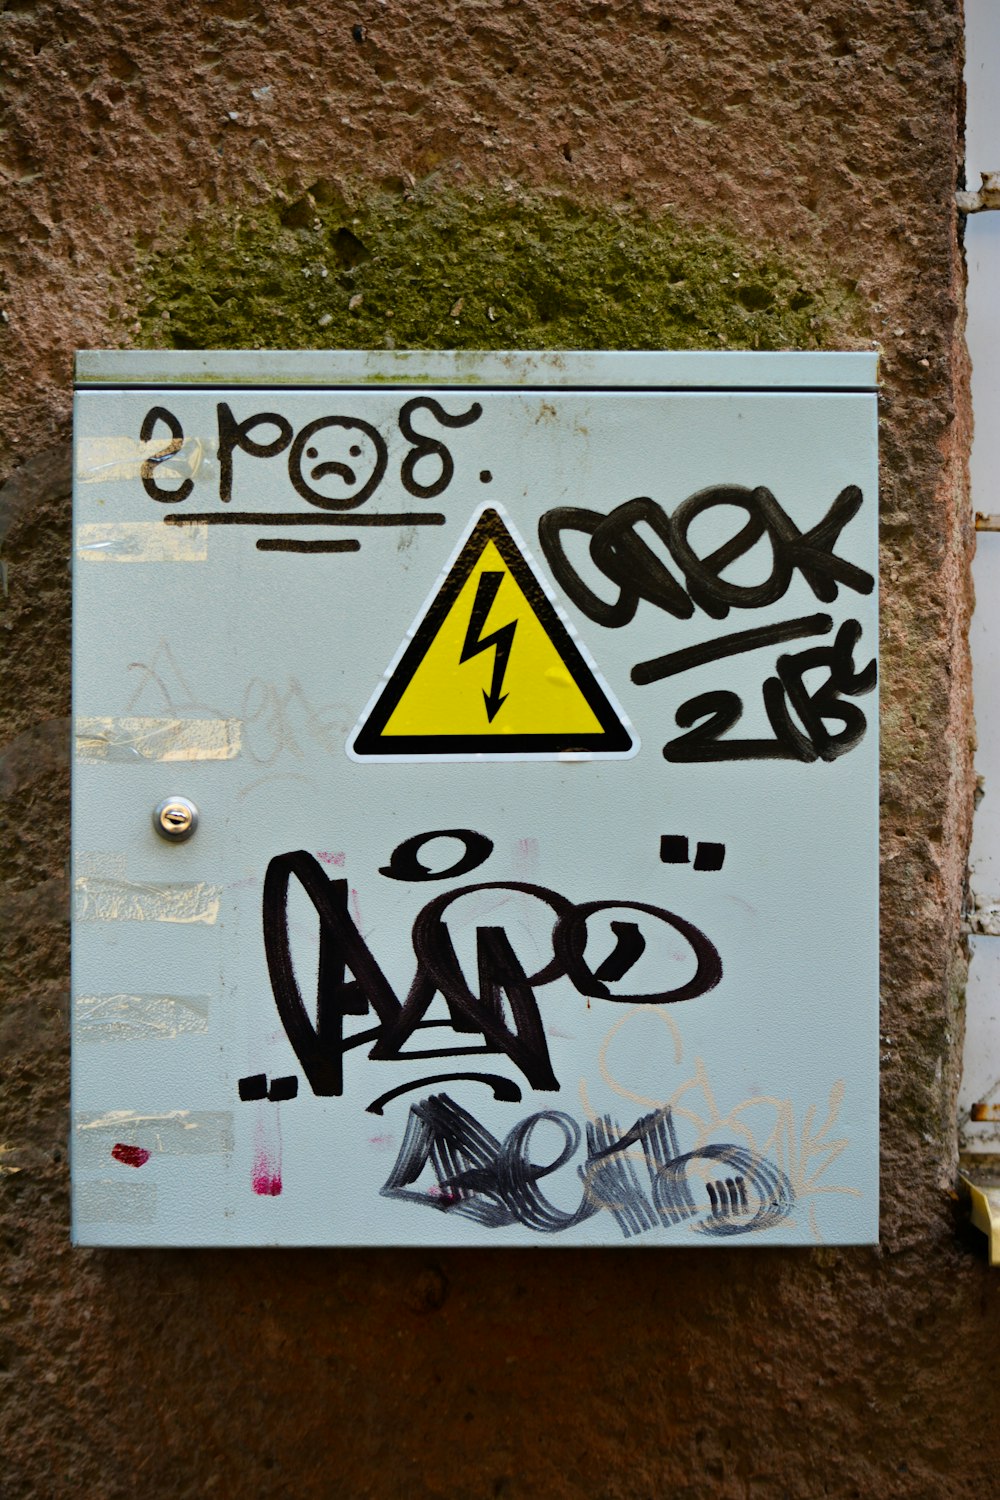 a sign on a wall with graffiti on it